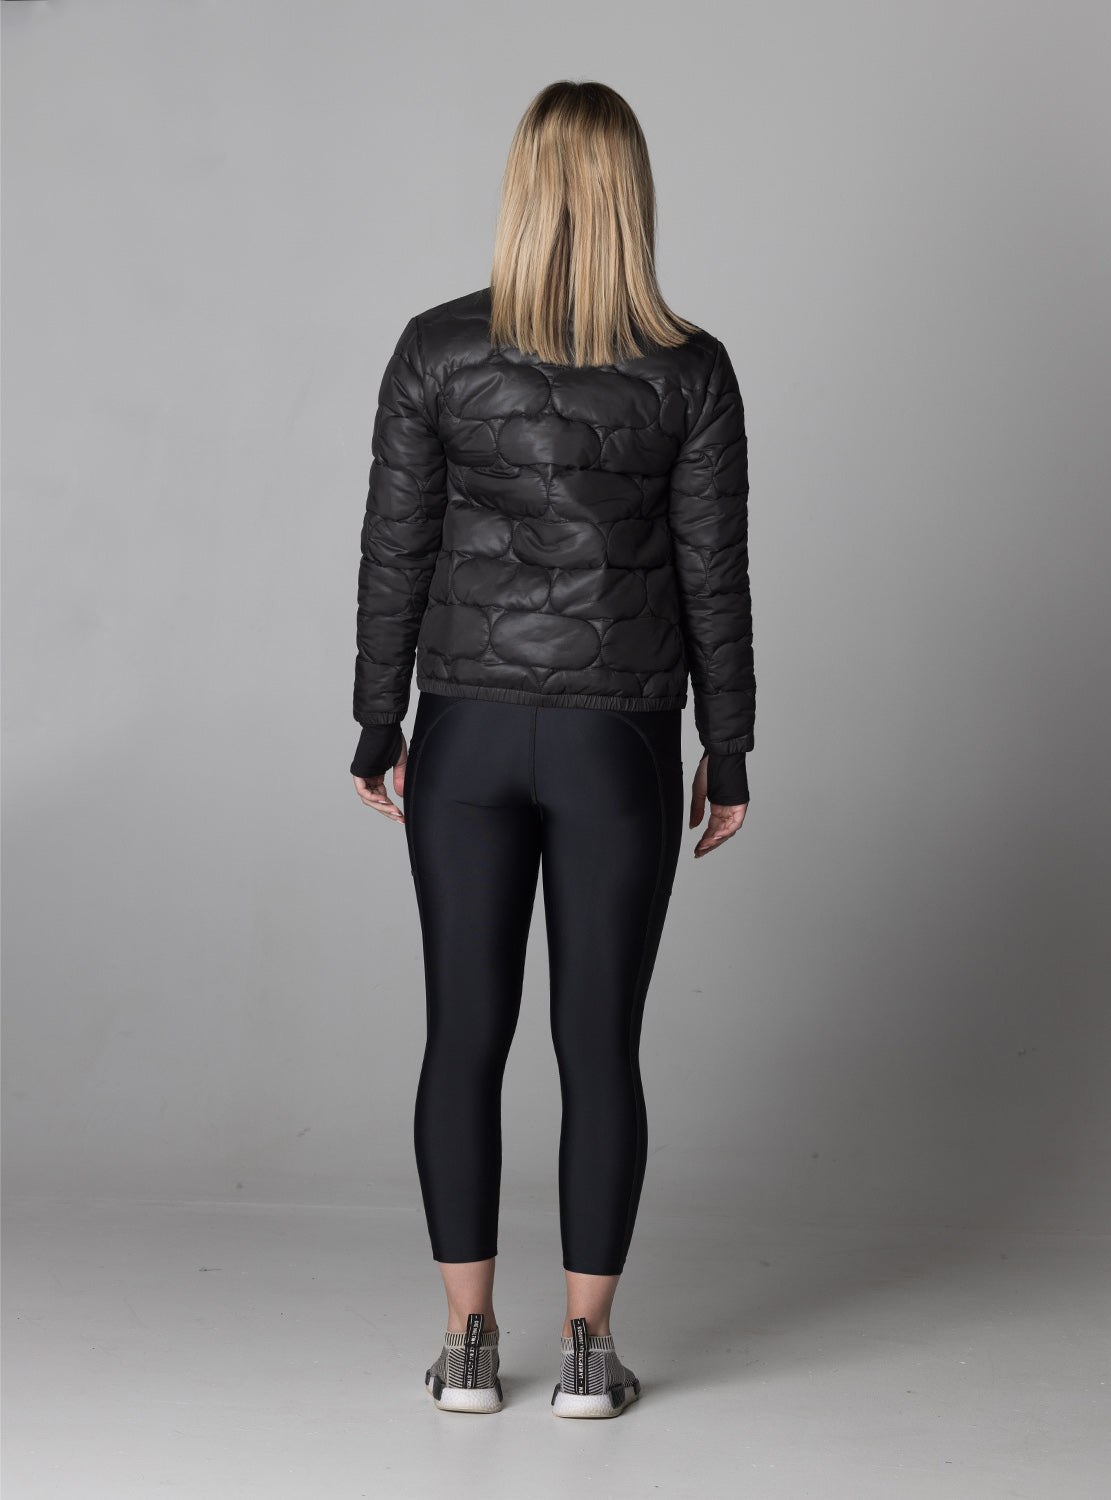 betty designs bdlab sportswear for women quilted bomber jacket